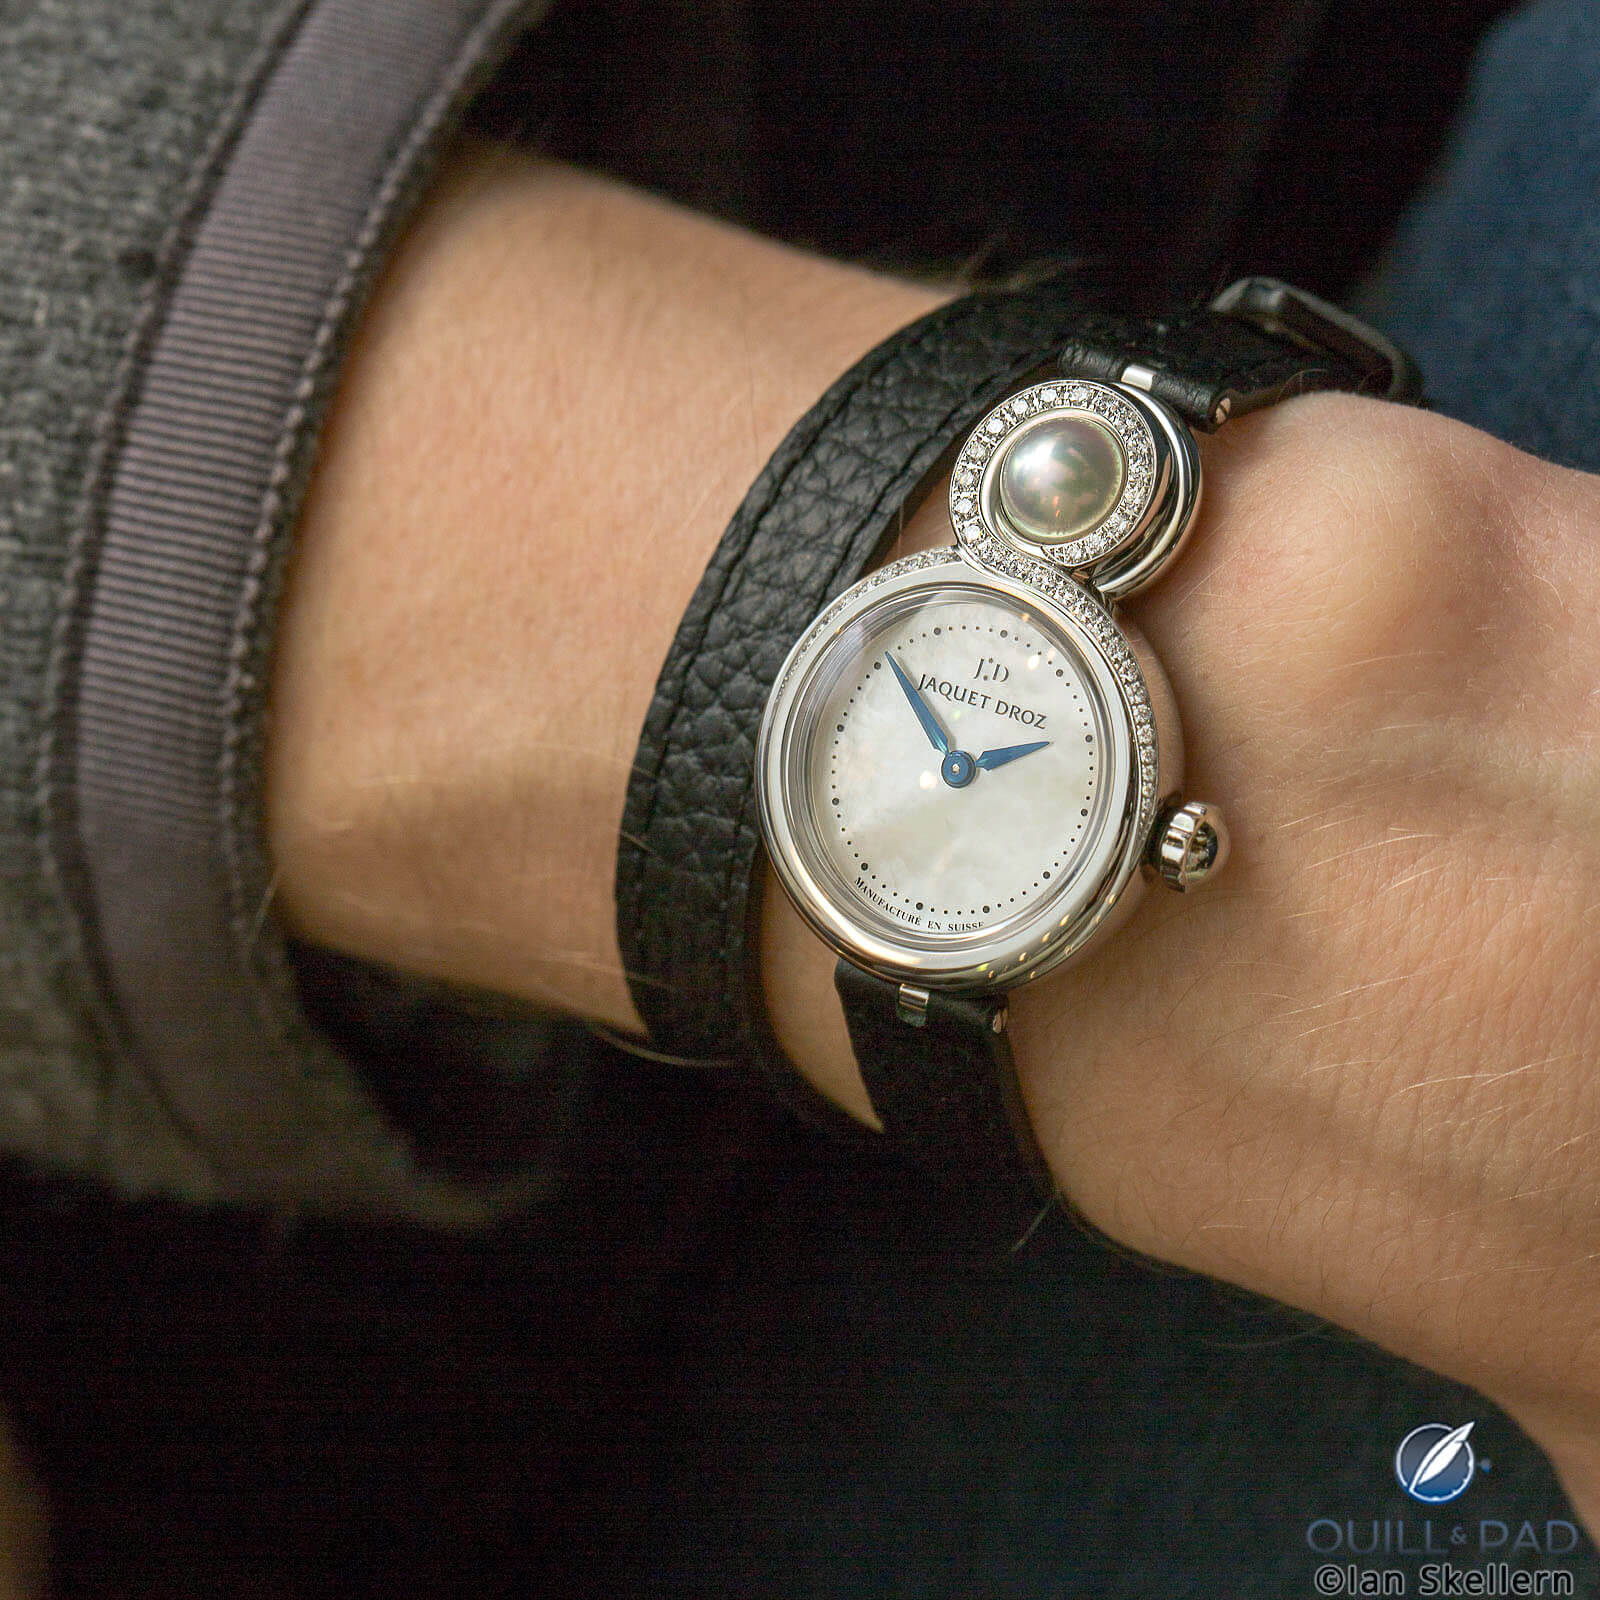 Jaquet Droz Lady 8 Petite with double wrap strap on the wrist